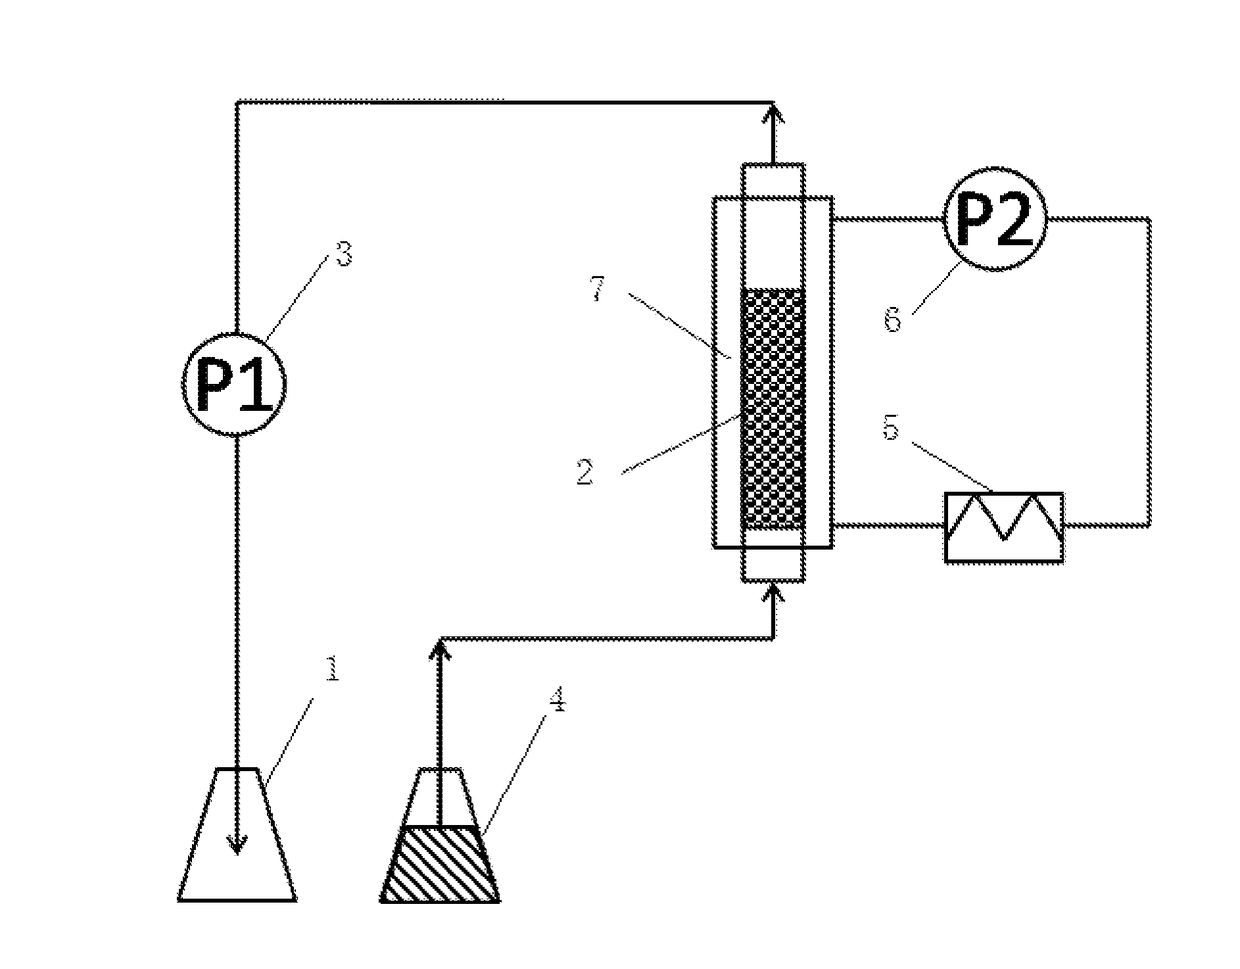 Method for Preparing Medium-Long-Chain Triglyceride Using Packed Bed Reactor